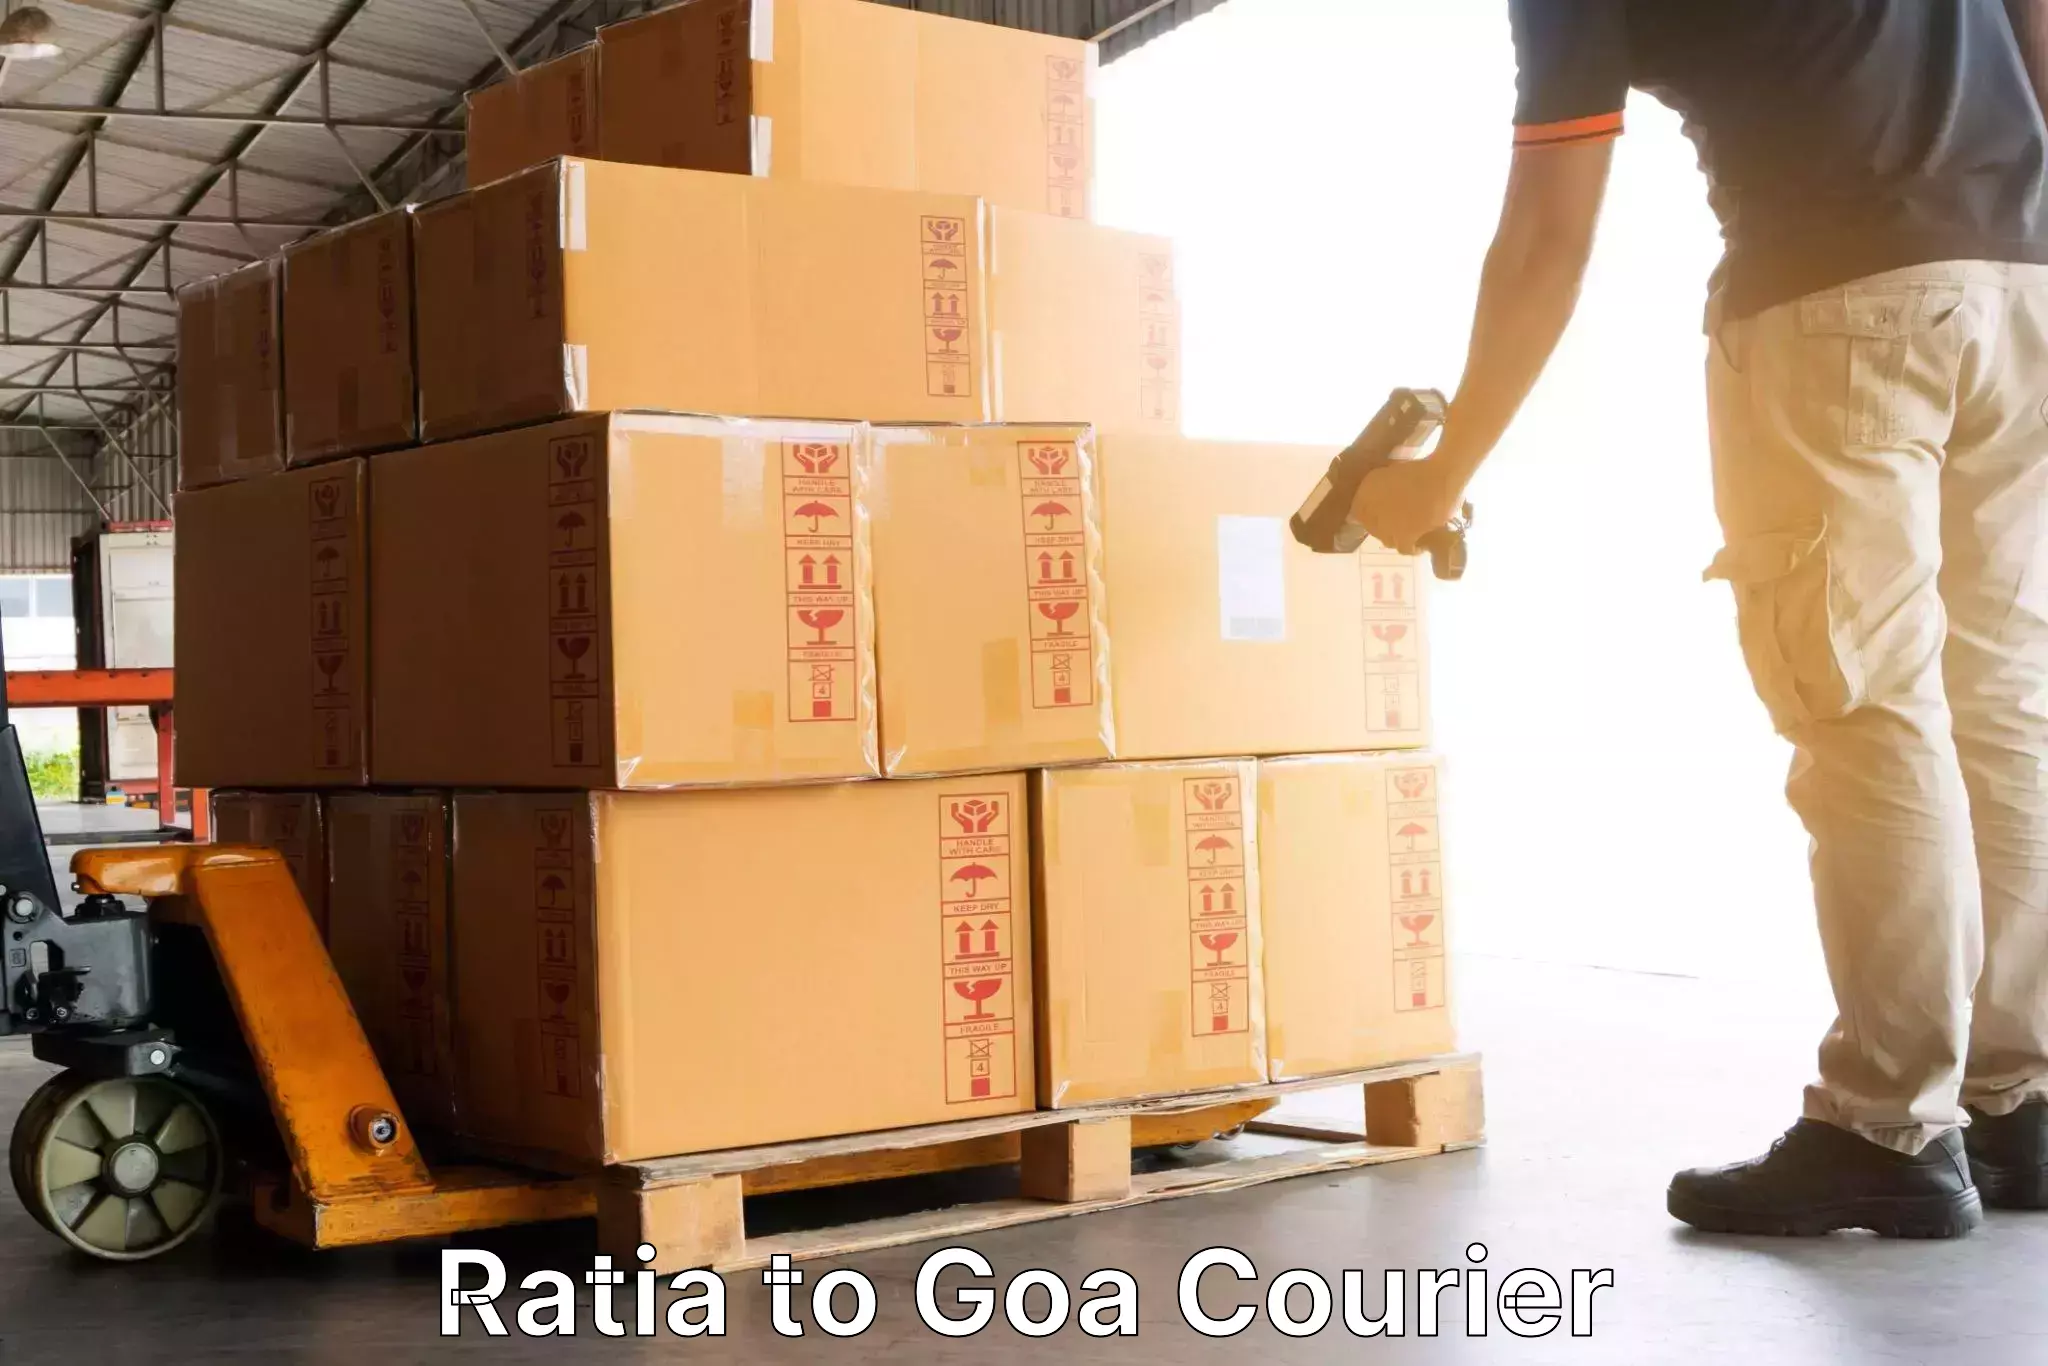 Global shipping networks in Ratia to Goa